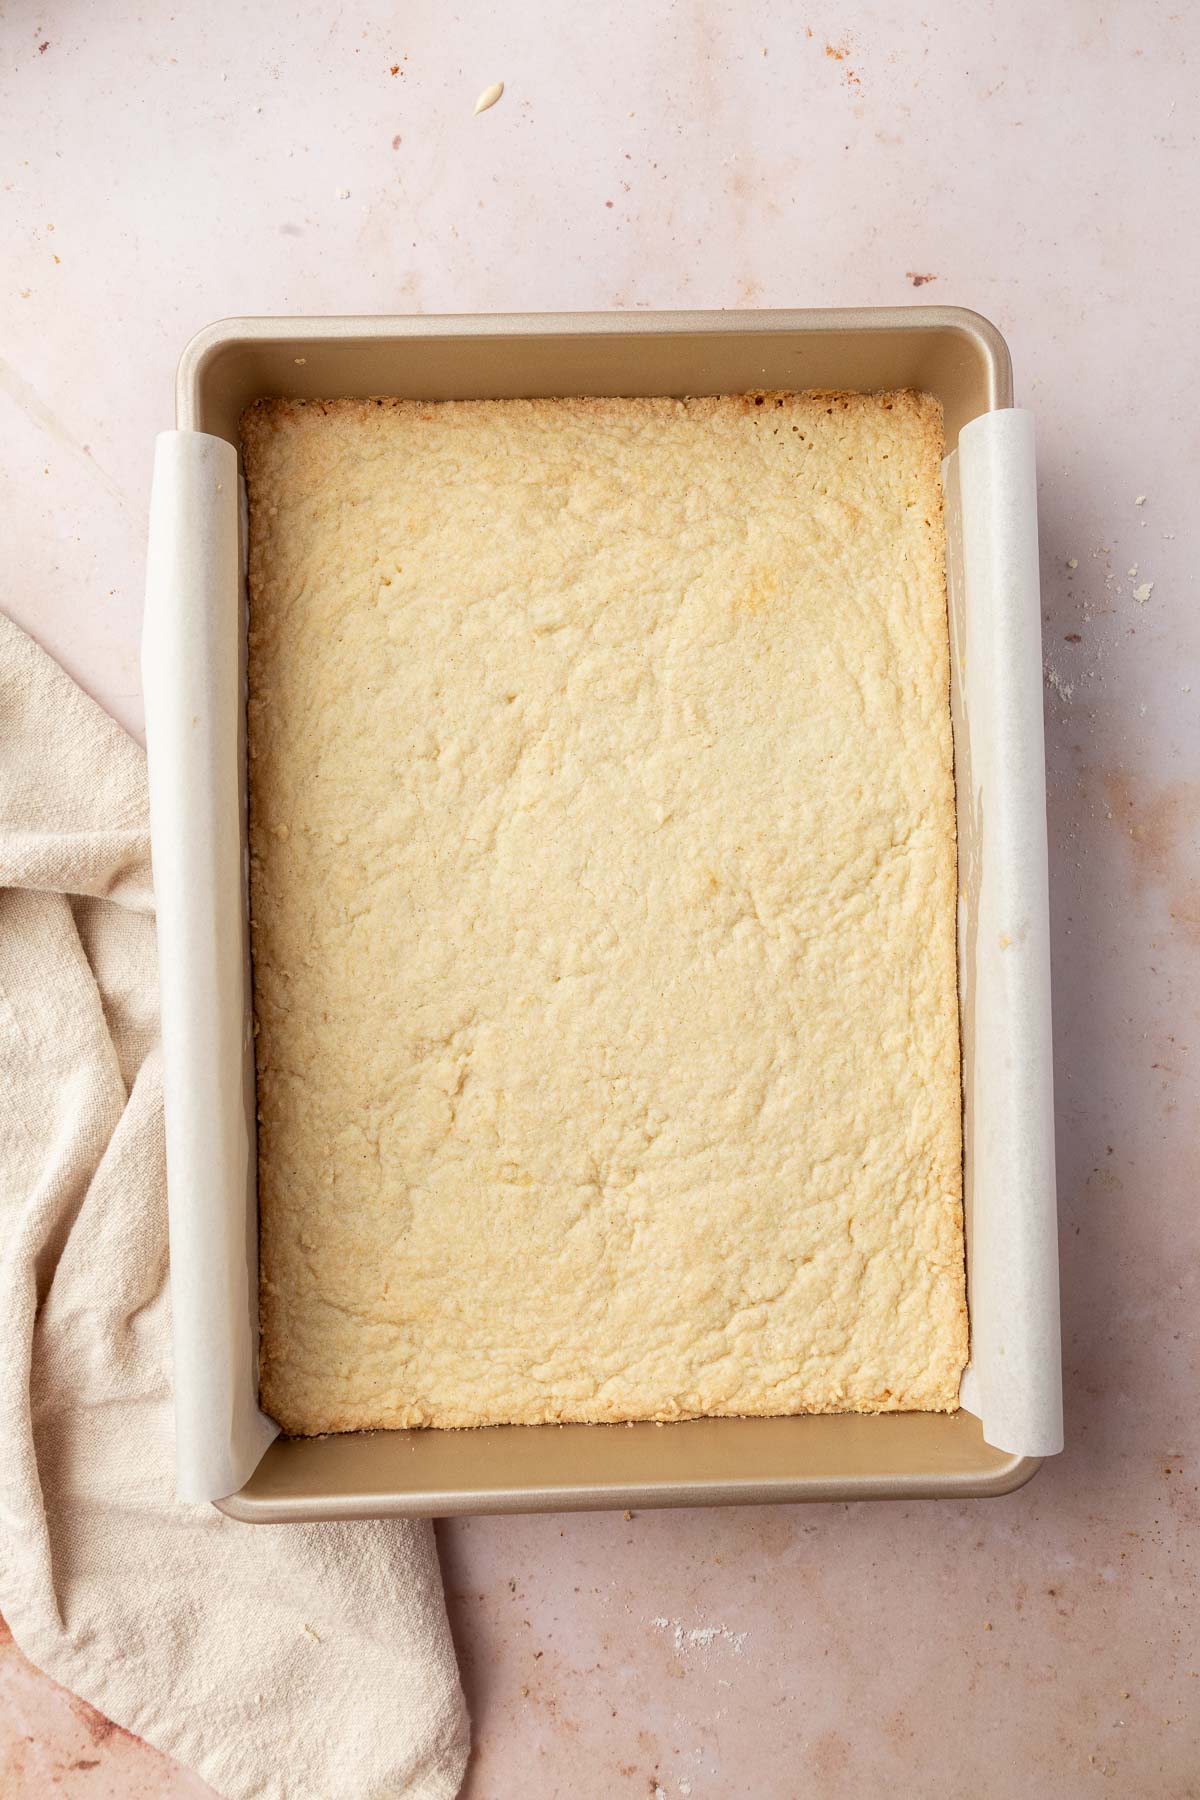 A gold metal rectangular baking pan lined with parchment paper and filled with a golden baked gluten-free shortbread crust.